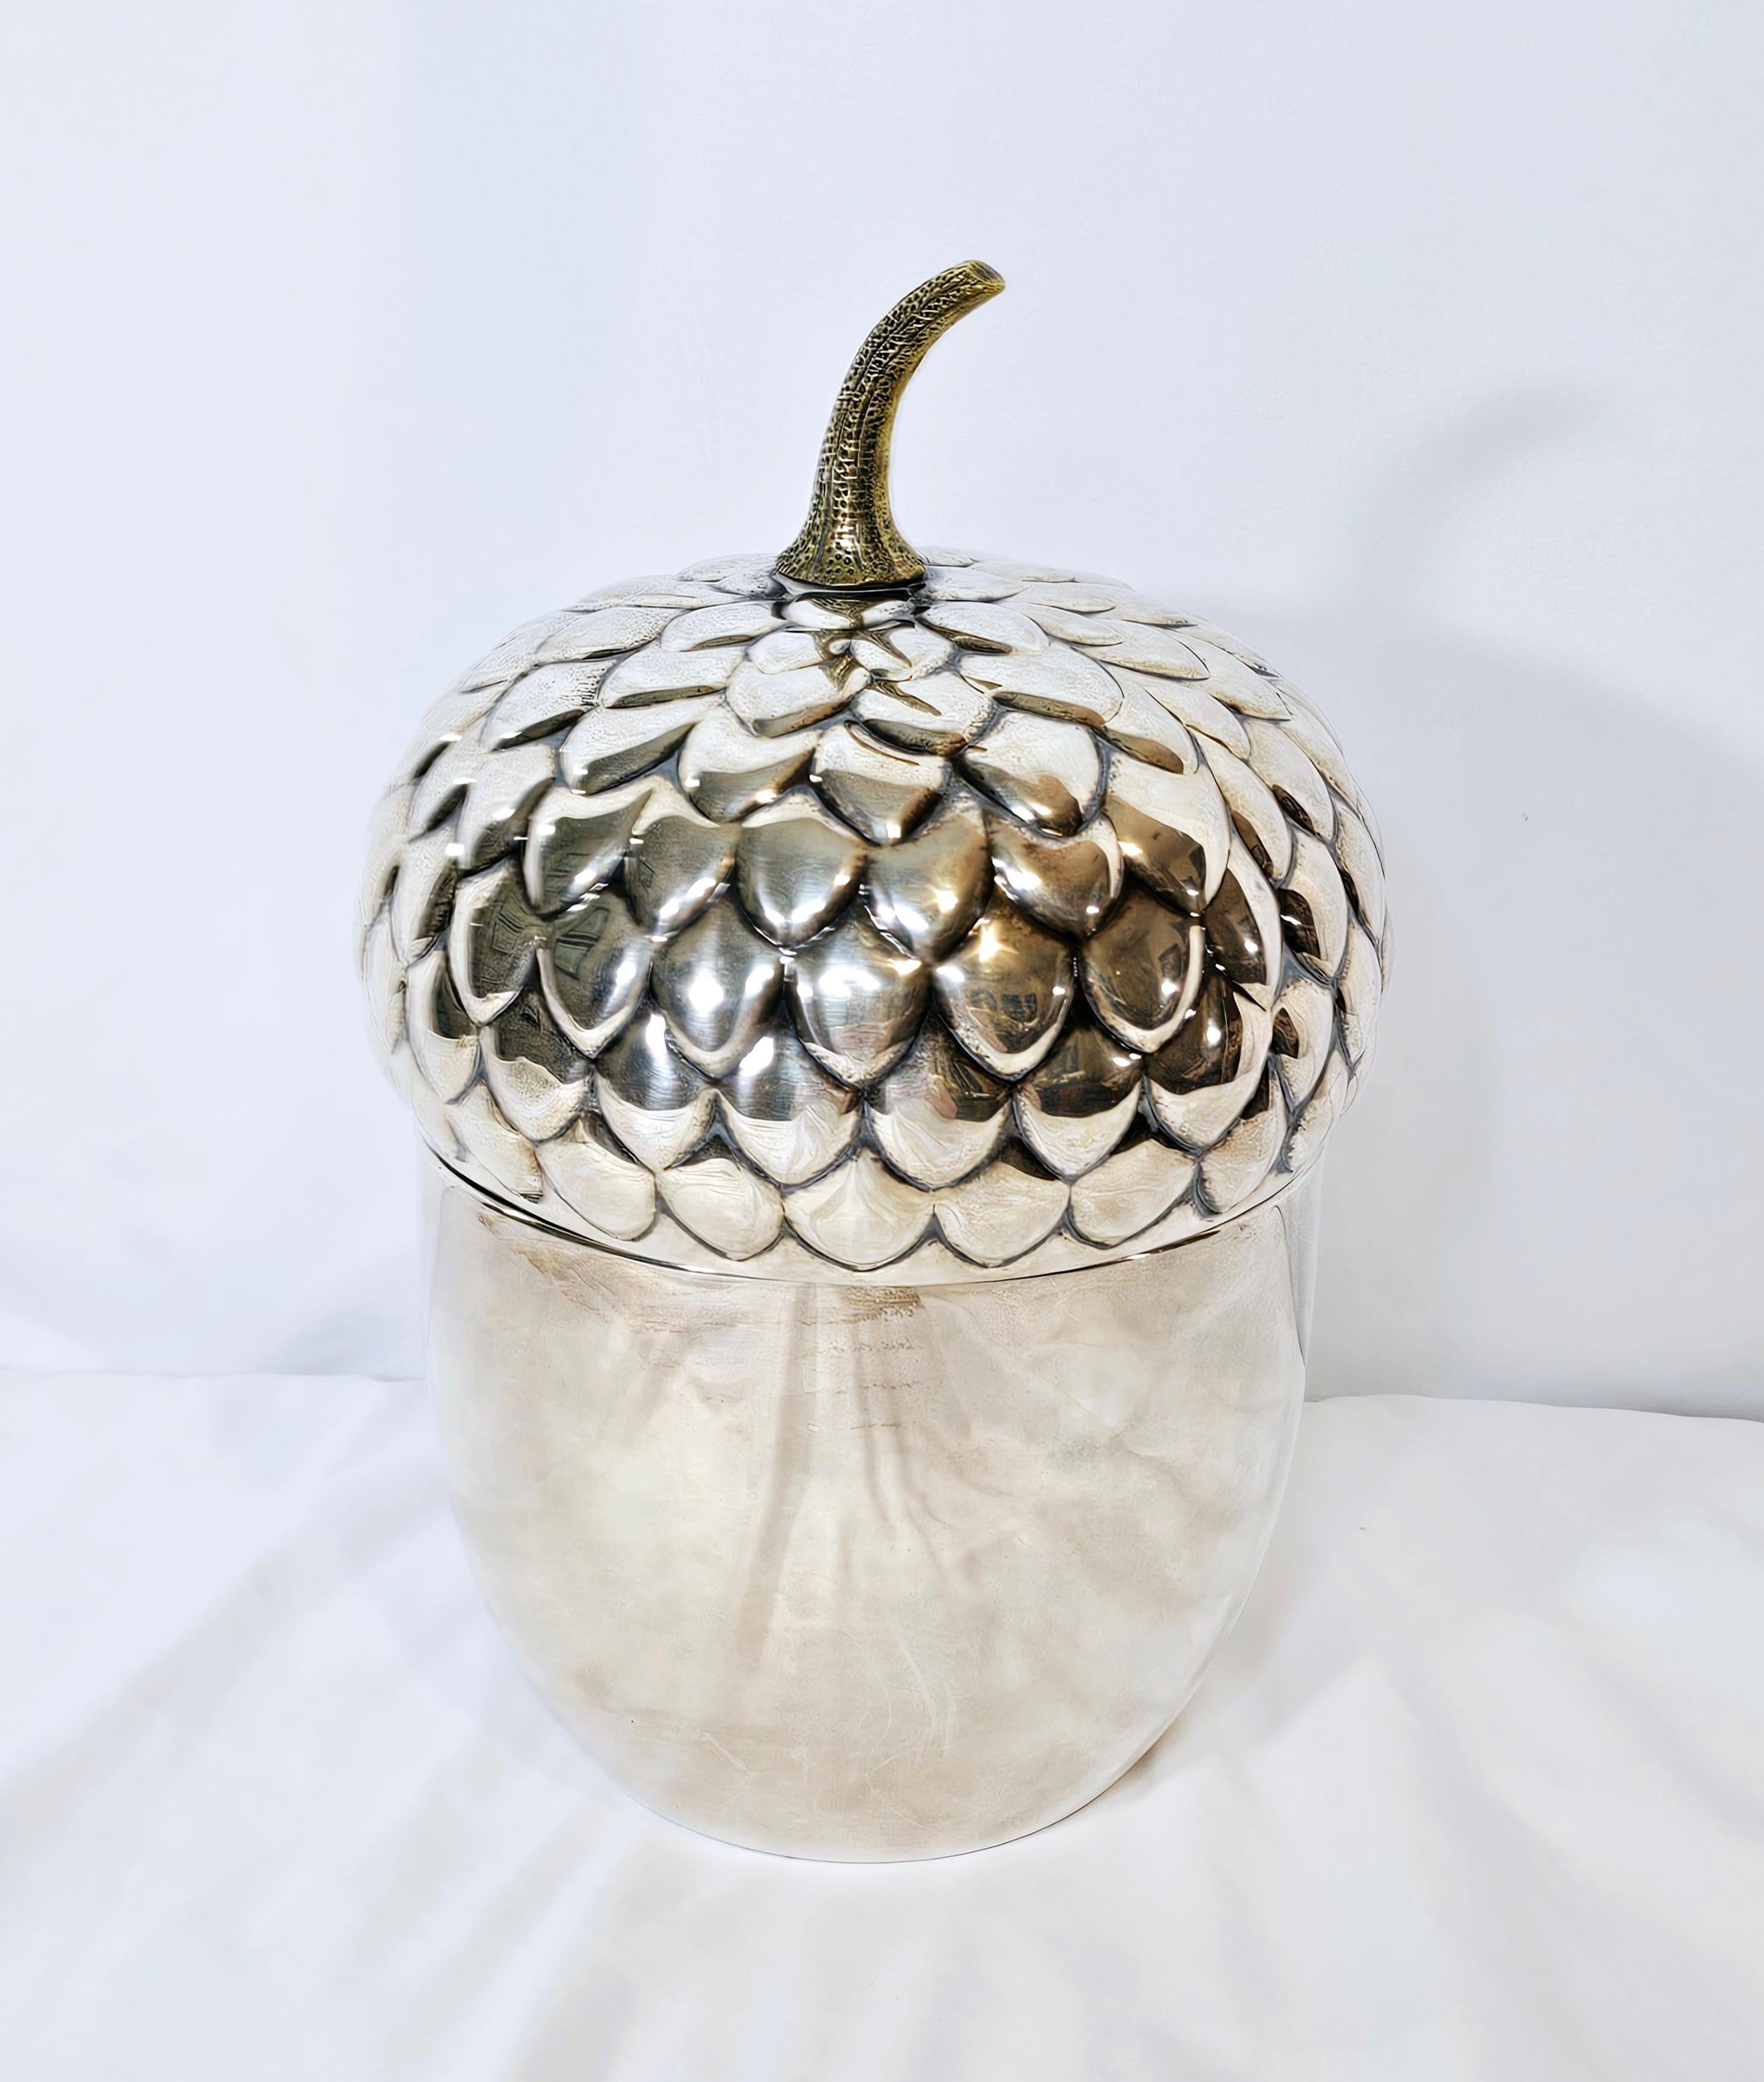 Bold.
Figurative. 
Sleek.
Teghini Firenze designed this lovely modernist silver plated ice bucket in the 1960s. 
The piece features a rounded shape with an oversized stylized acorn design with a lid and a white plastic insert. 
There is a visible